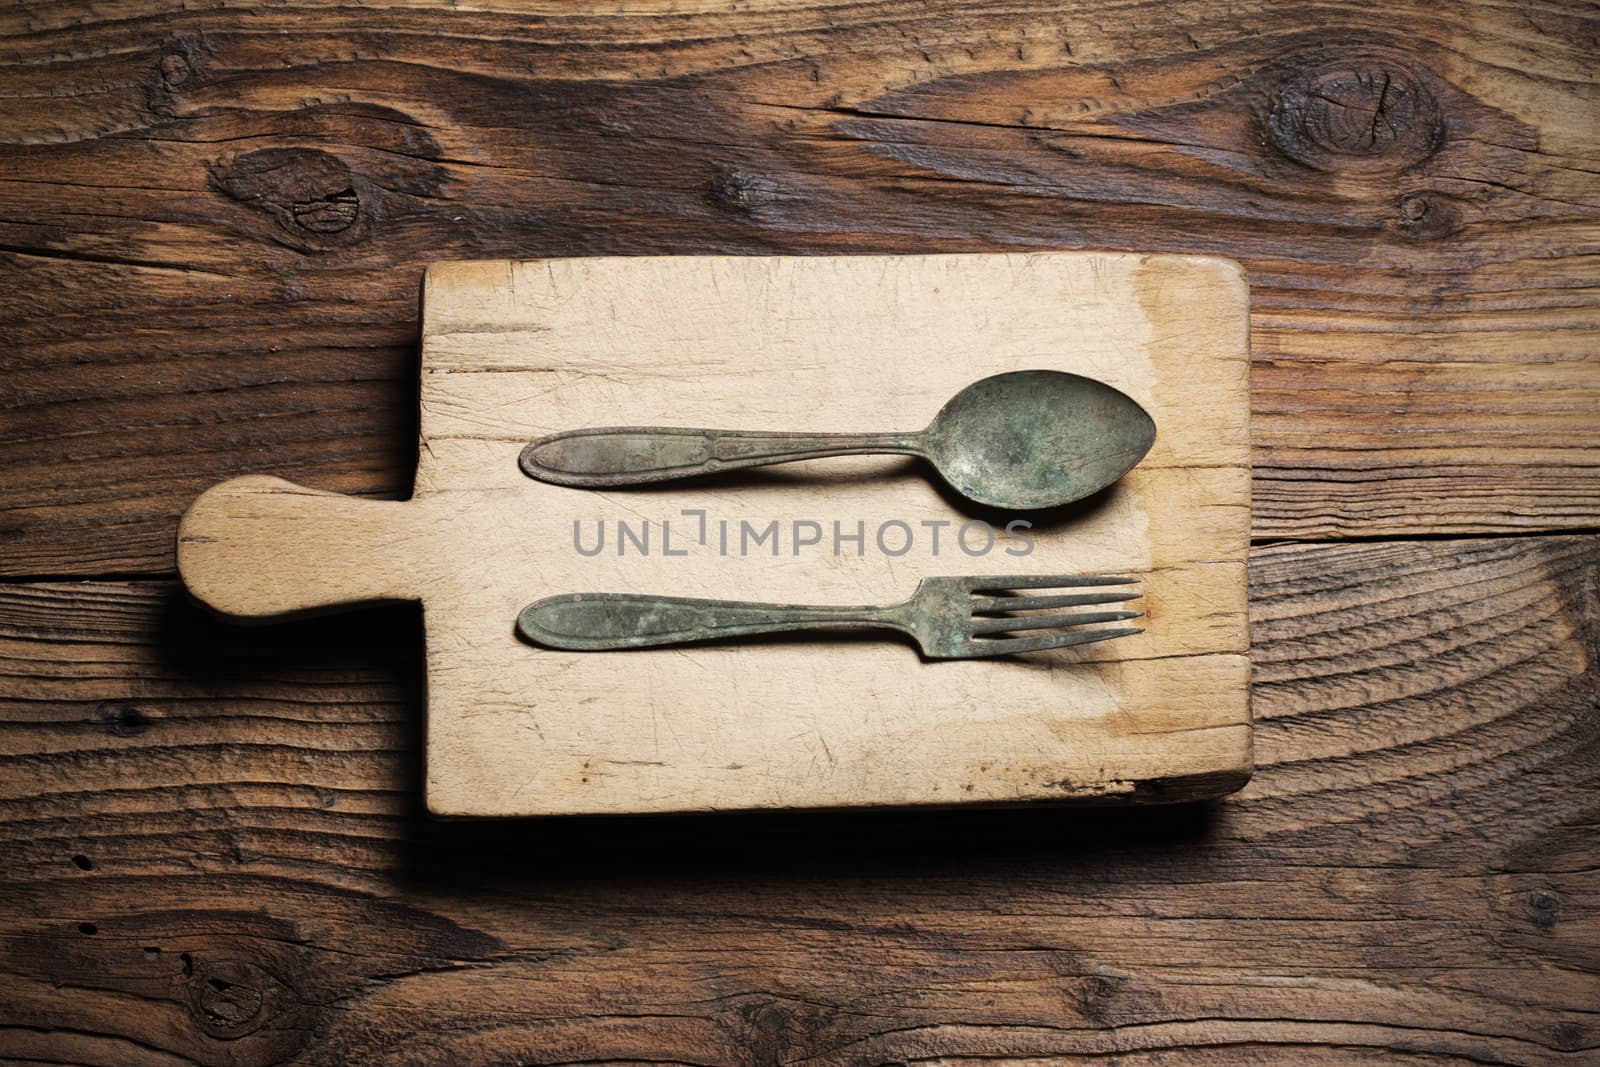 Spoon and fork, on old wood background